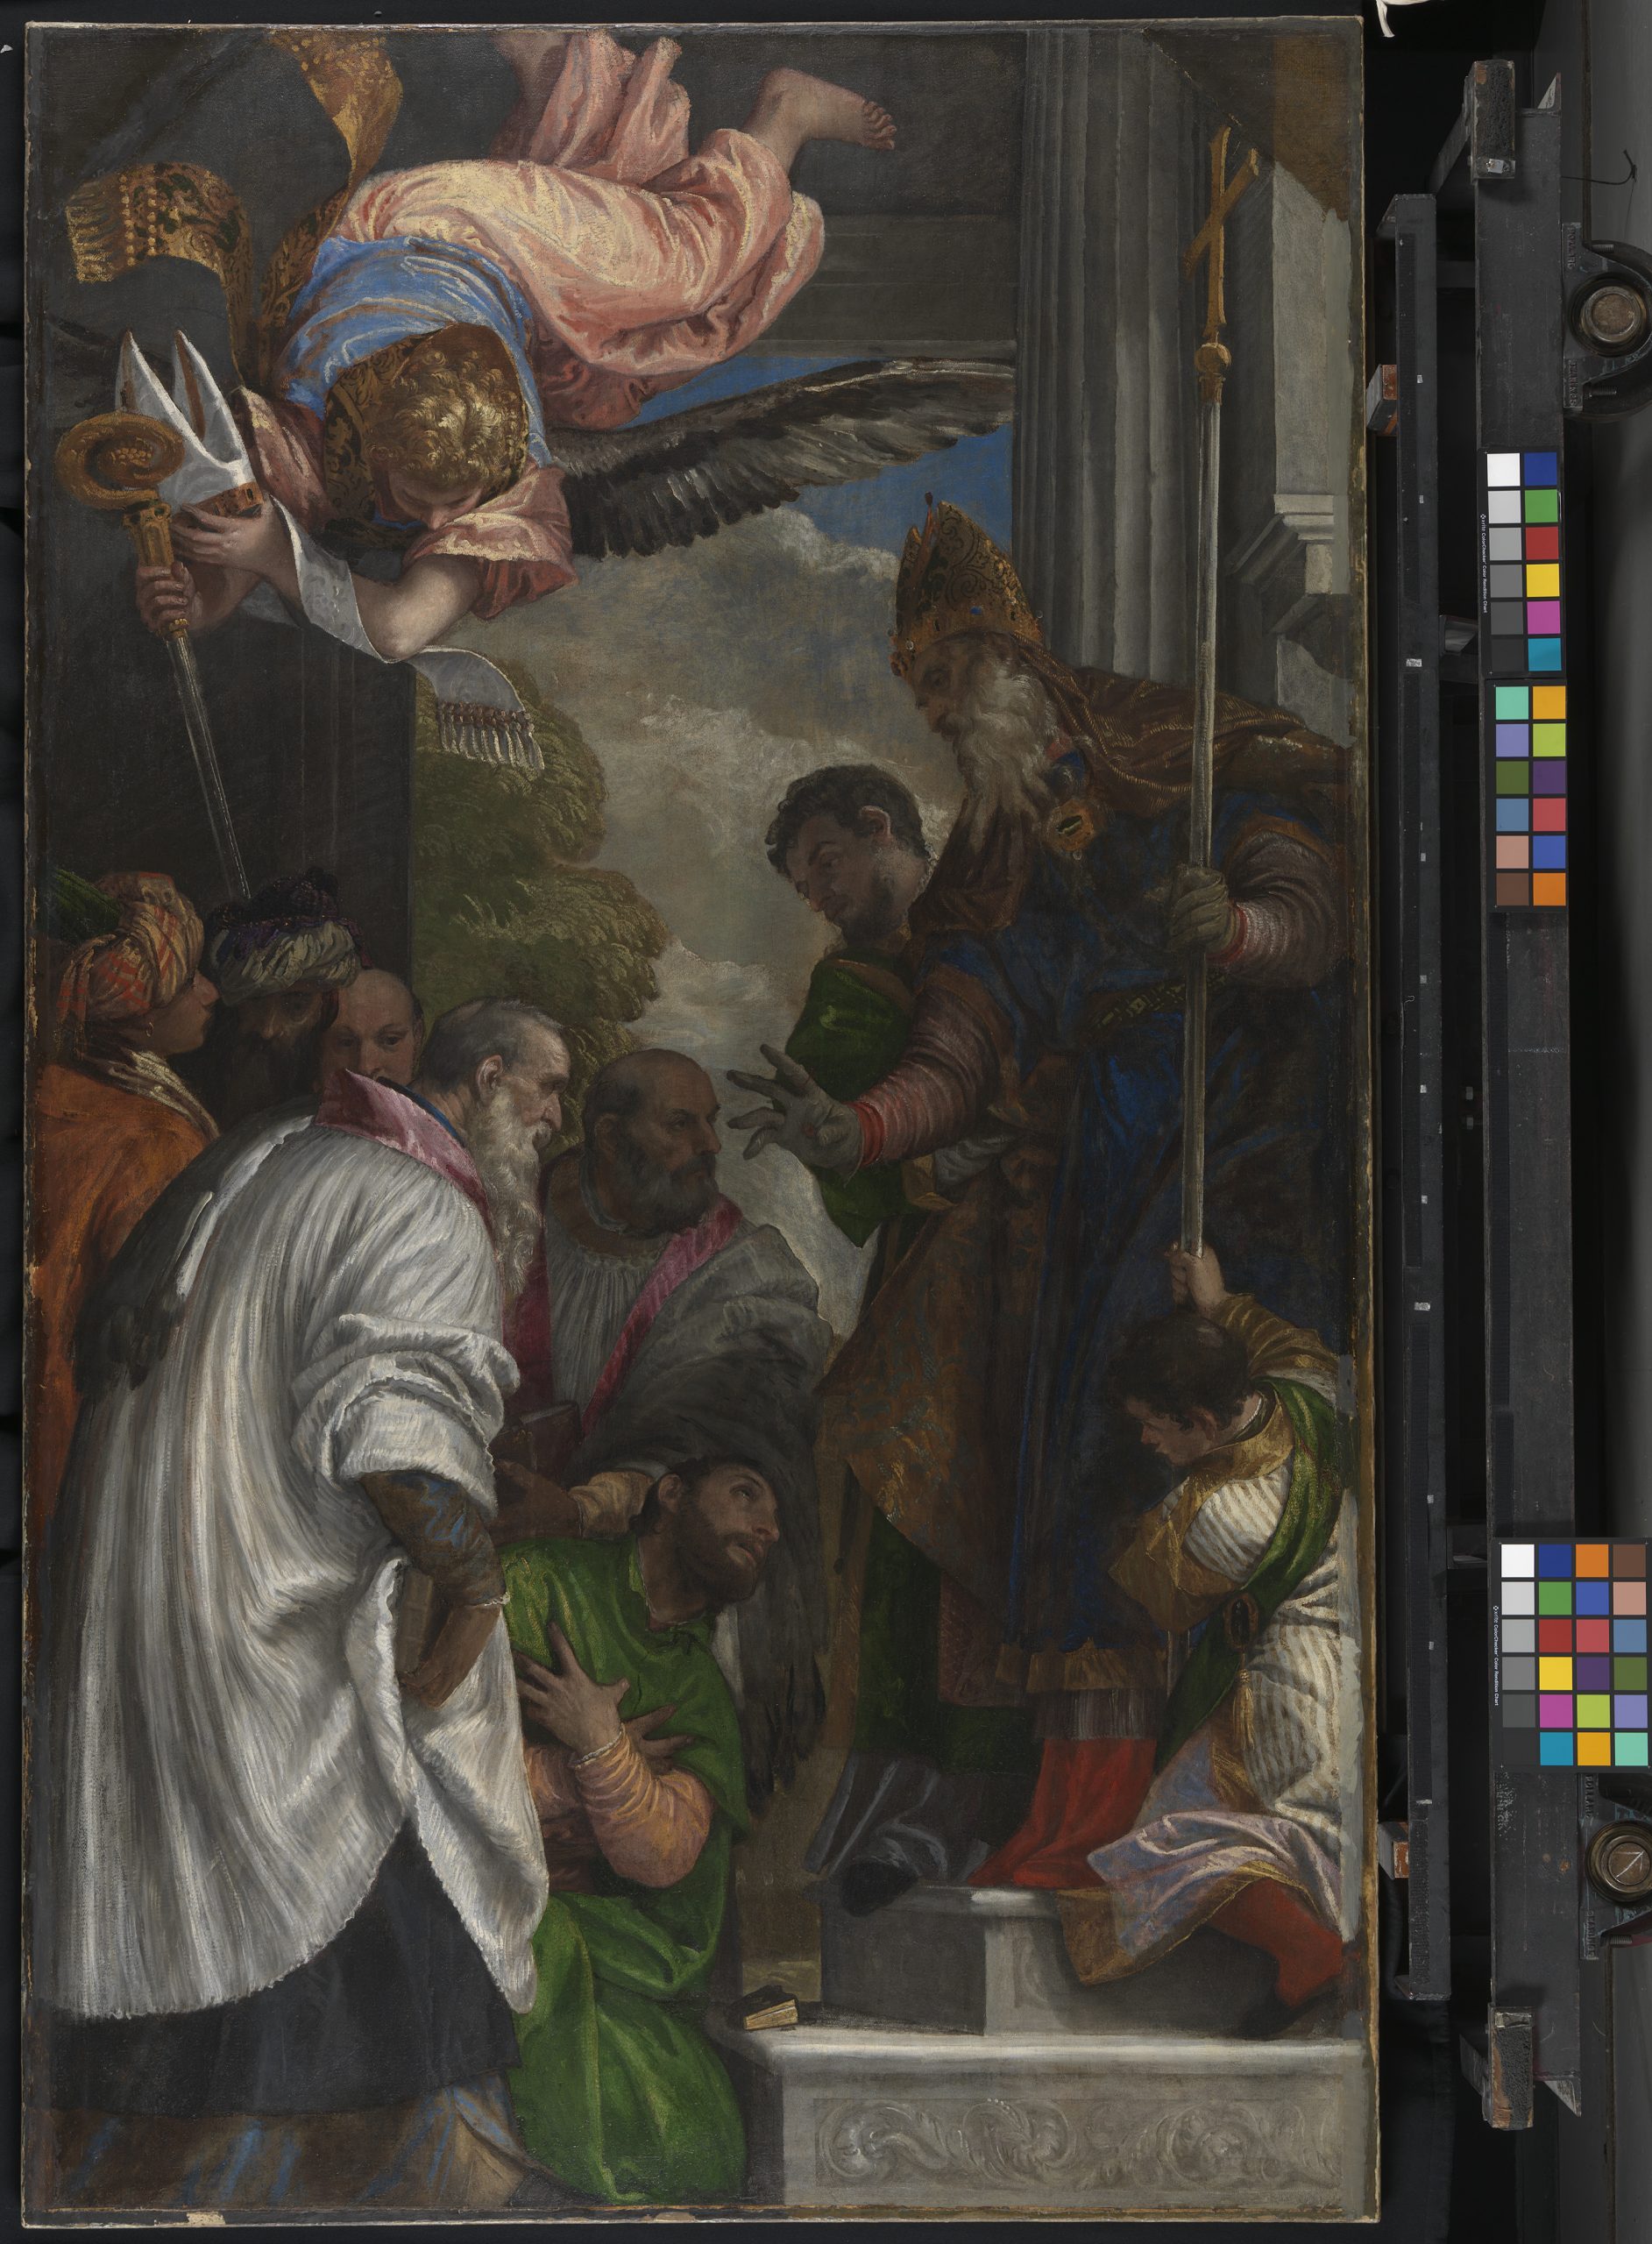 Paolo Veronese The Consecration of Saint Nicholas, 1562 © The National Gallery, London